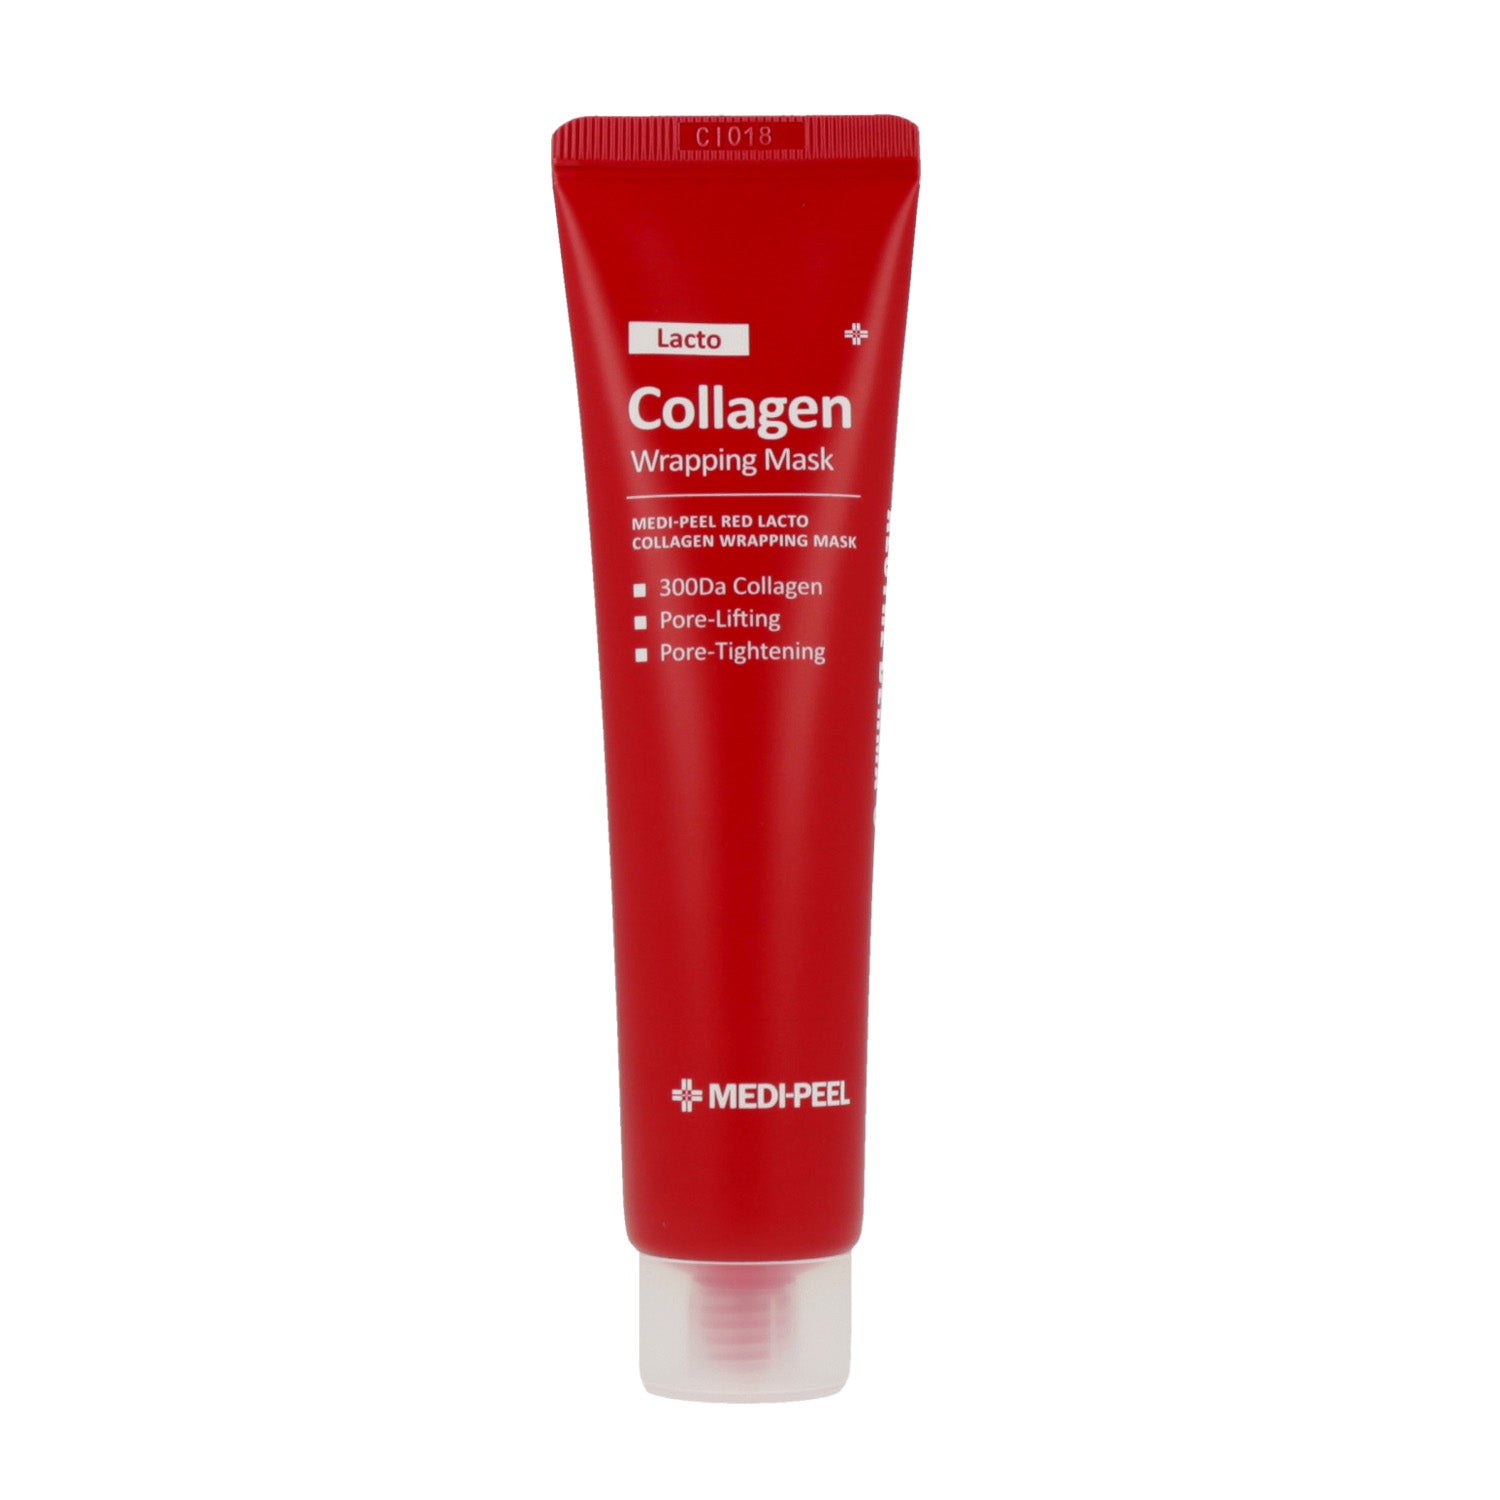 Collagen cream for sensitive skin - MEDI-PEEL Red Lacto Collagen Wrapping Mask 70ml.